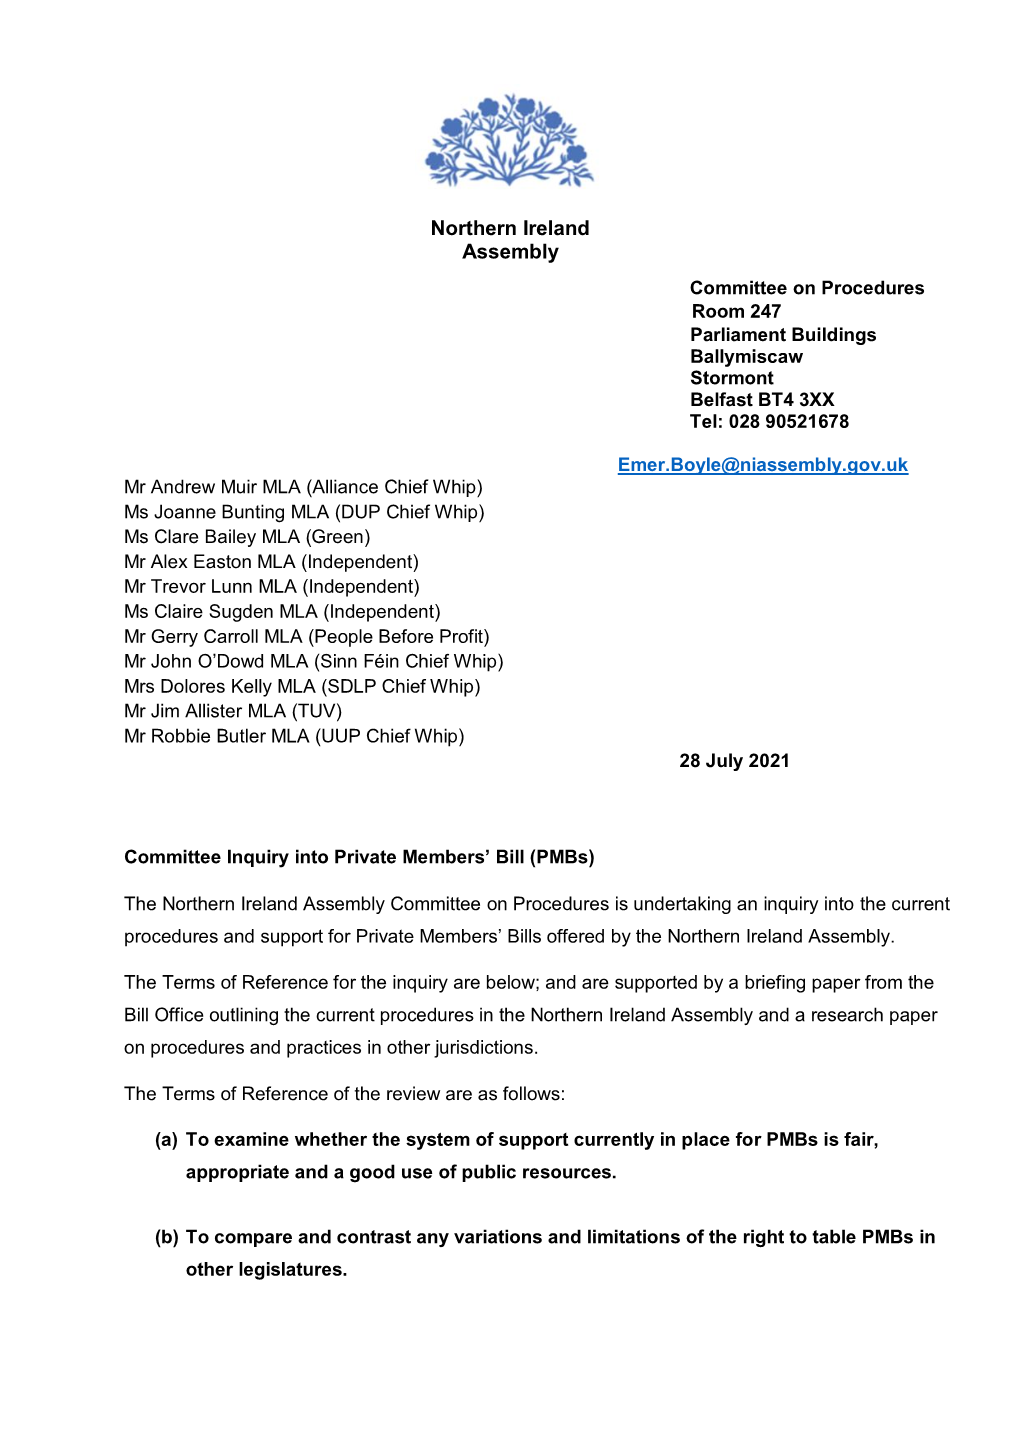 28 July 2021 Letter to Party Groups